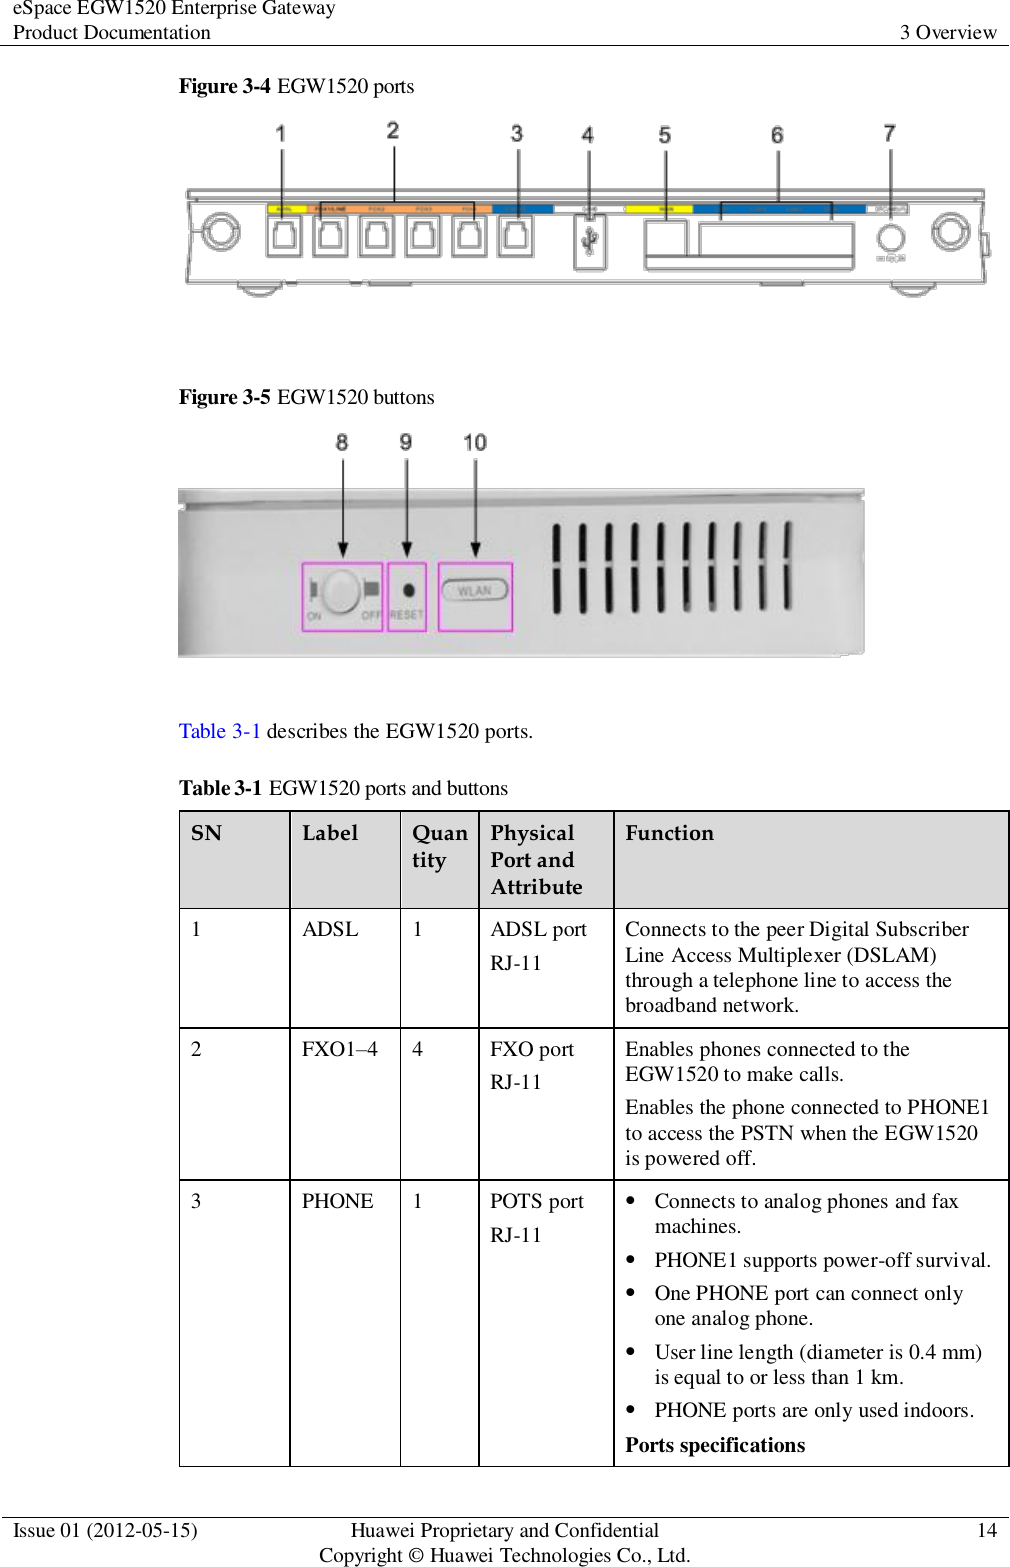 eSpace EGW1520 Enterprise Gateway Product Documentation 3 Overview  Issue 01 (2012-05-15) Huawei Proprietary and Confidential                                     Copyright © Huawei Technologies Co., Ltd. 14  Figure 3-4 EGW1520 ports   Figure 3-5 EGW1520 buttons   Table 3-1 describes the EGW1520 ports. Table 3-1 EGW1520 ports and buttons SN Label Quantity Physical Port and Attribute Function 1 ADSL 1 ADSL port RJ-11 Connects to the peer Digital Subscriber Line Access Multiplexer (DSLAM) through a telephone line to access the broadband network. 2 FXO1–4 4 FXO port RJ-11 Enables phones connected to the EGW1520 to make calls. Enables the phone connected to PHONE1 to access the PSTN when the EGW1520 is powered off. 3 PHONE 1 POTS port RJ-11  Connects to analog phones and fax machines.  PHONE1 supports power-off survival.  One PHONE port can connect only one analog phone.  User line length (diameter is 0.4 mm) is equal to or less than 1 km.  PHONE ports are only used indoors. Ports specifications 